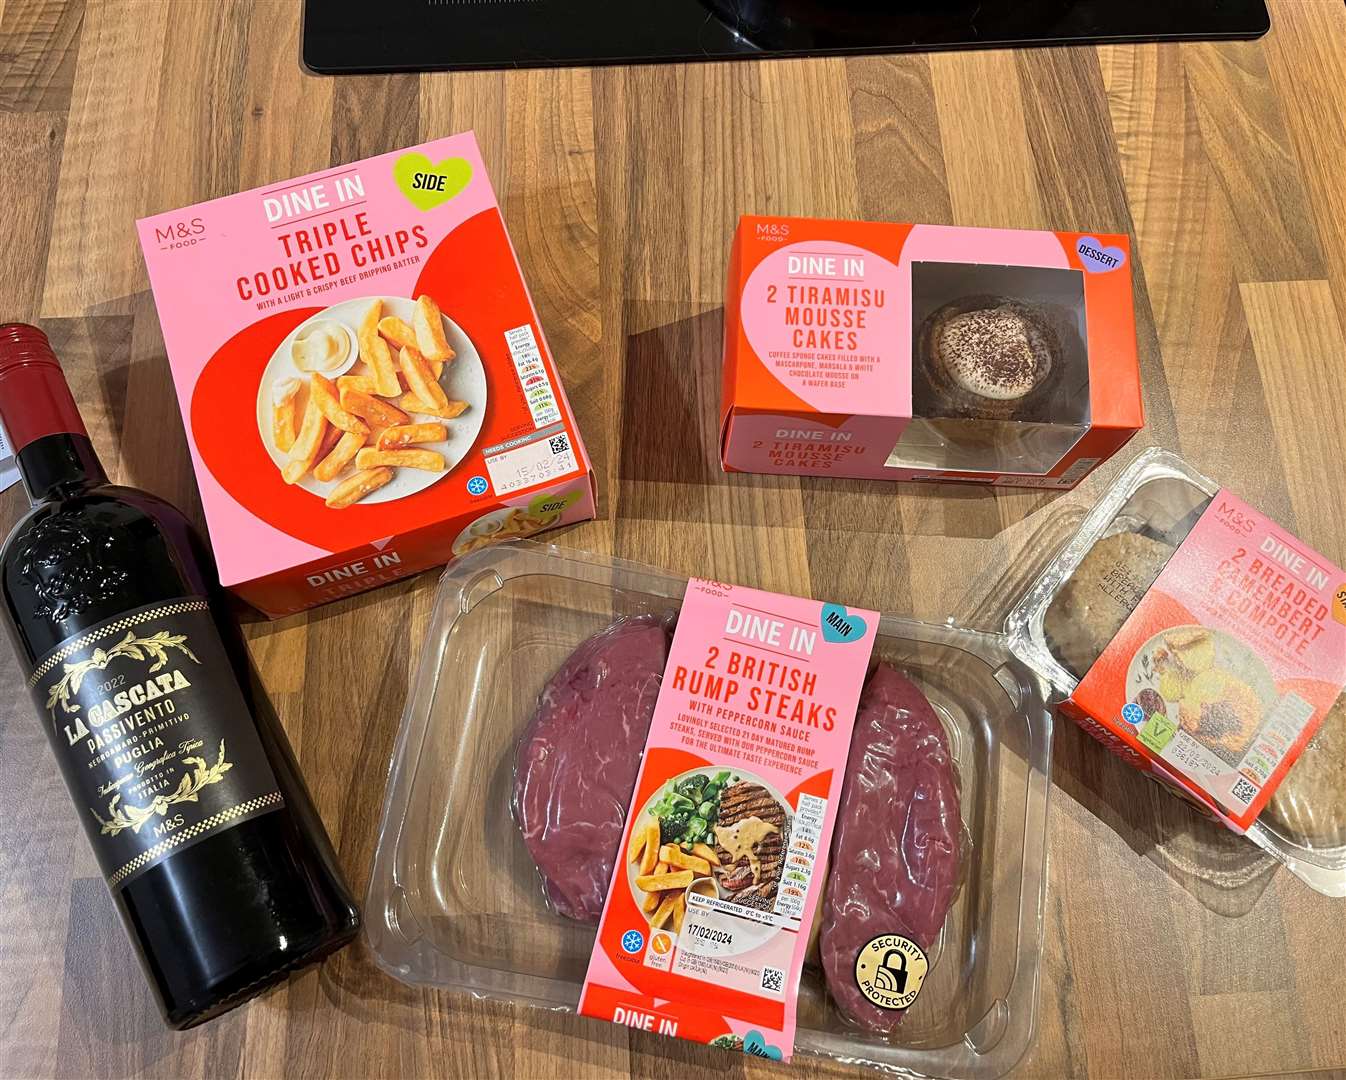 Everything included in the M&S meal deal for £25